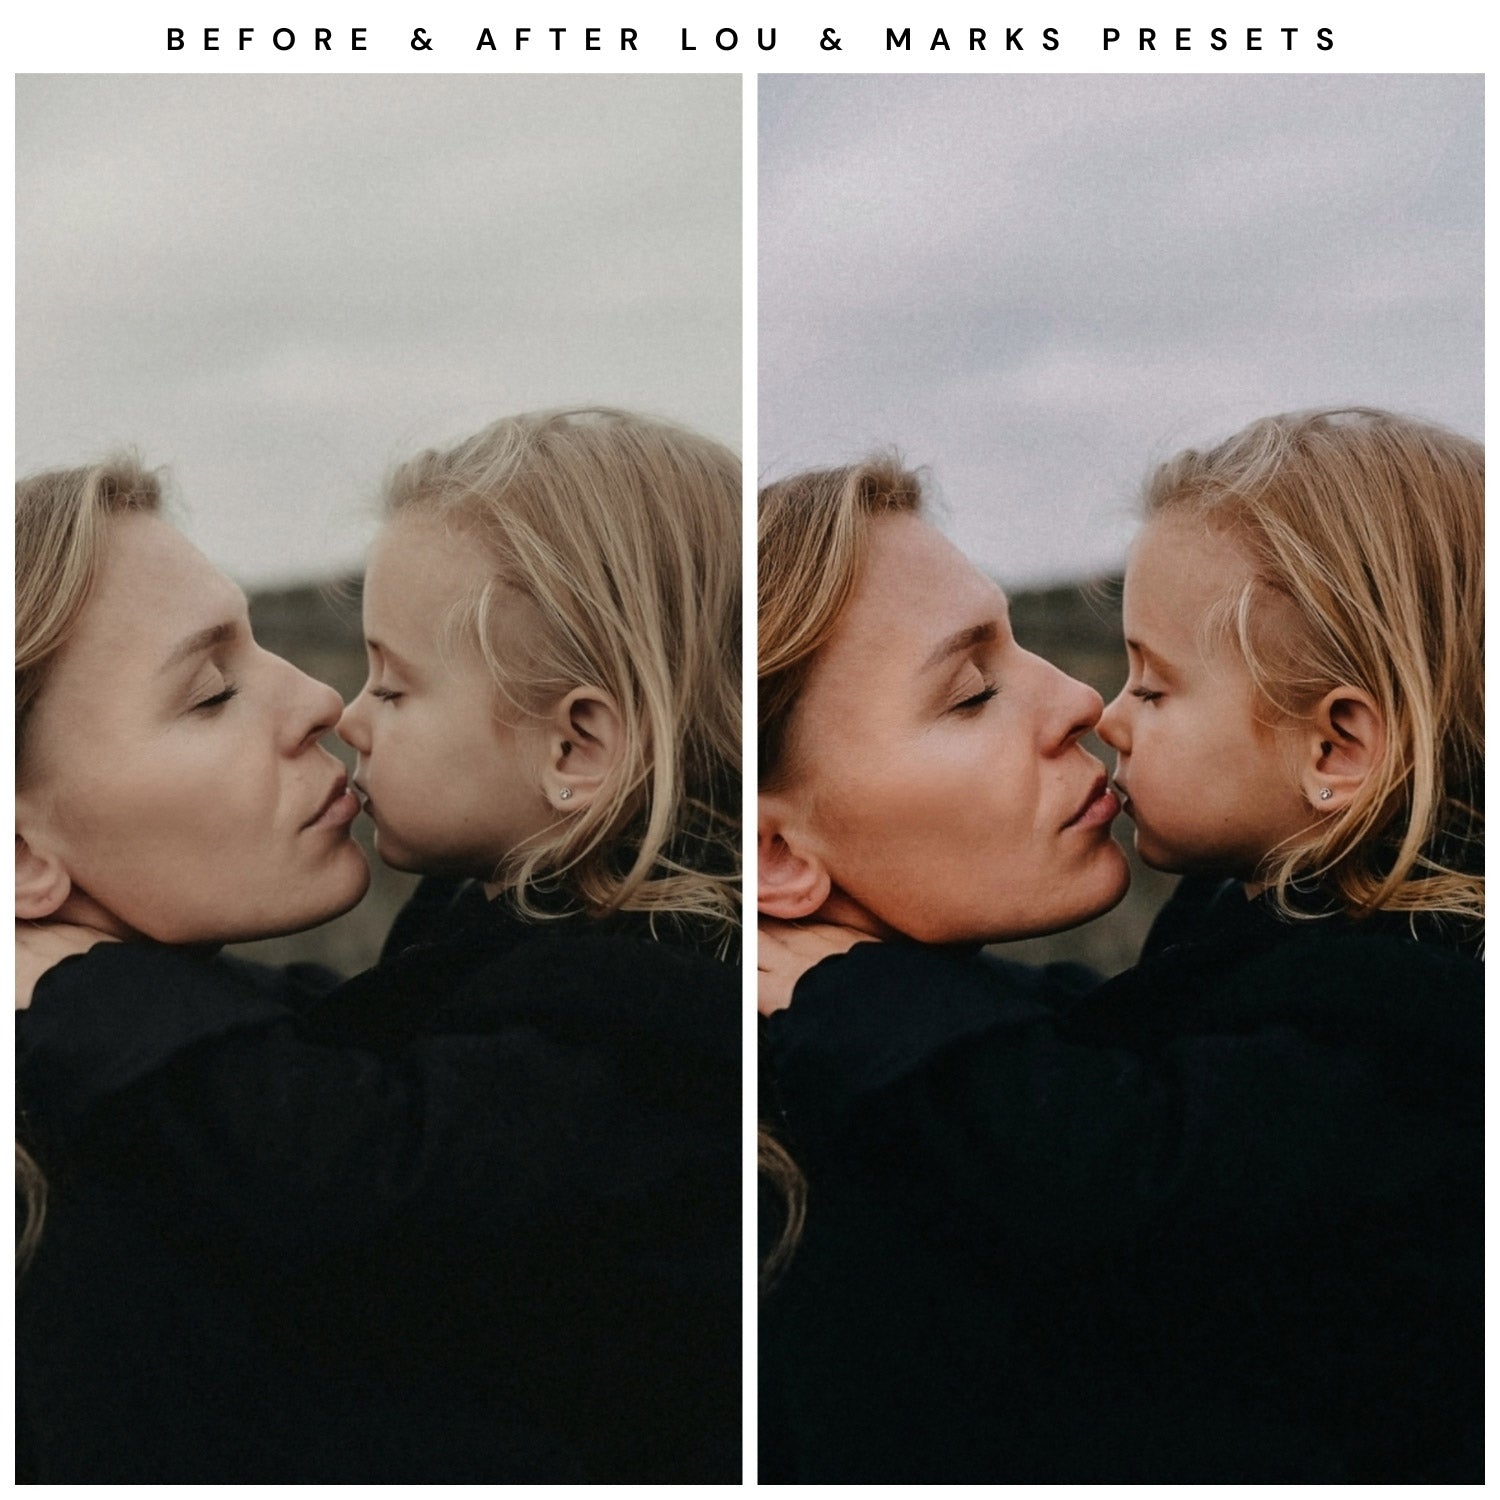 Lou And Marks Presets Moody Lightroom Presets Bundle The Best Moody Presets Baby